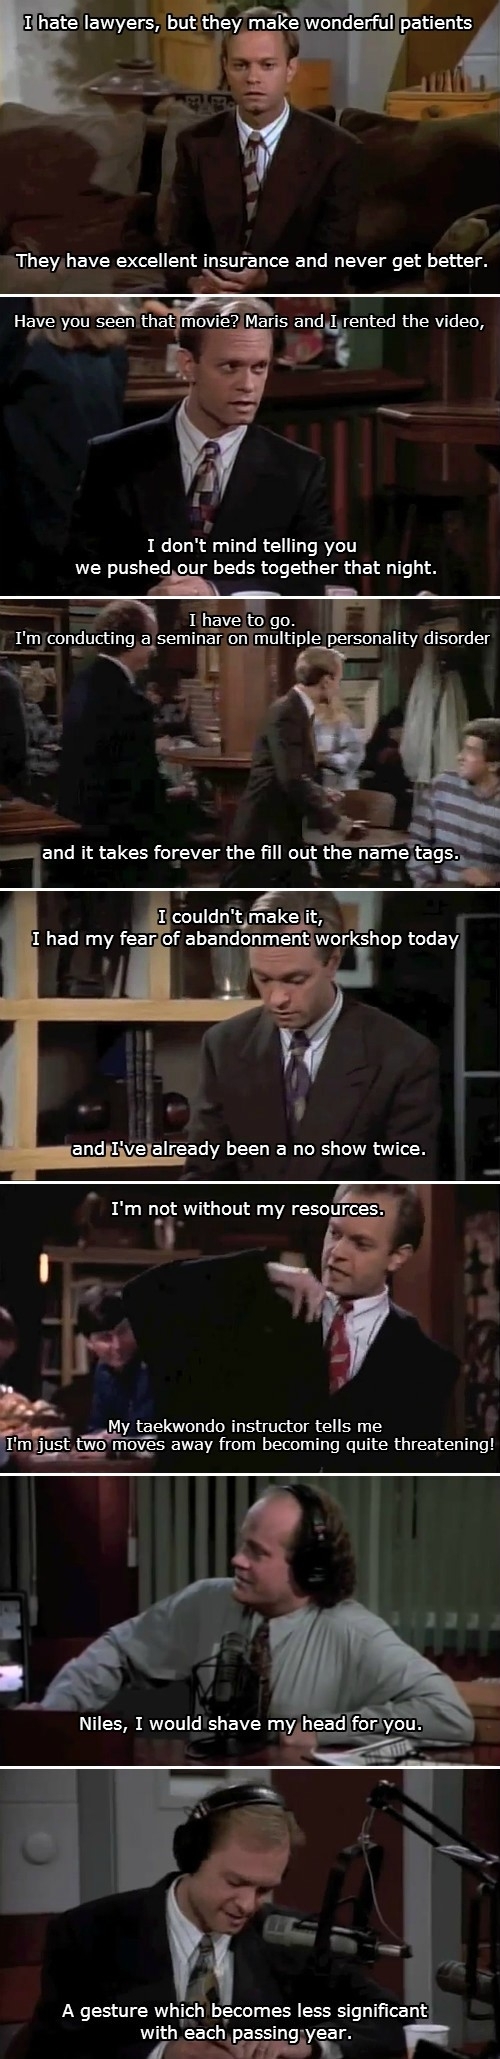 I miss this show Niles always had the best one liners and zingers